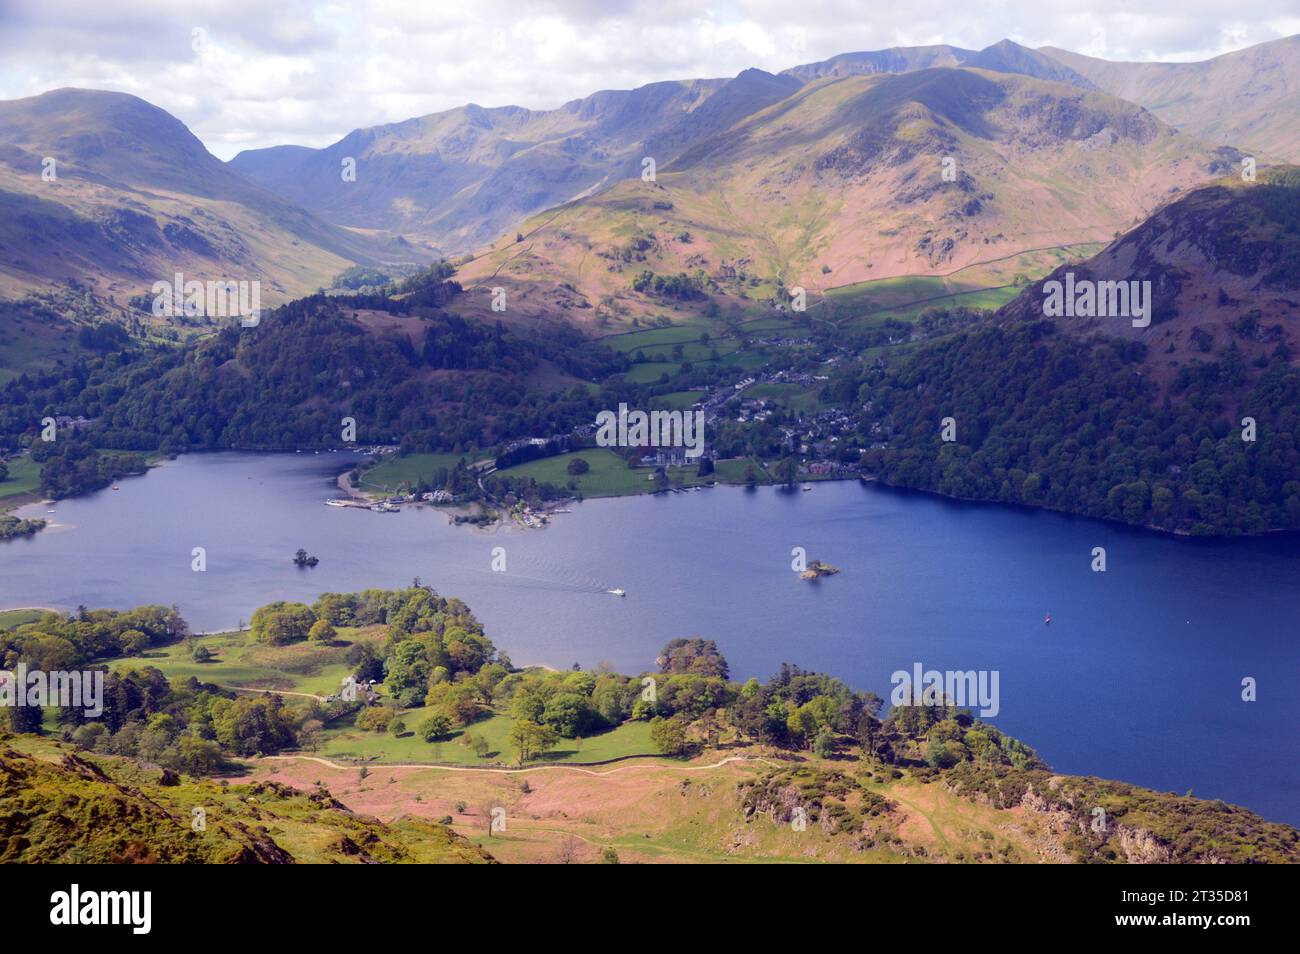 Ullswater Lake and the Grisedale/Glenridding Valleys from near the Summit of 'The Knight' in the Lake District National Park, Cumbria, England, UK Stock Photo